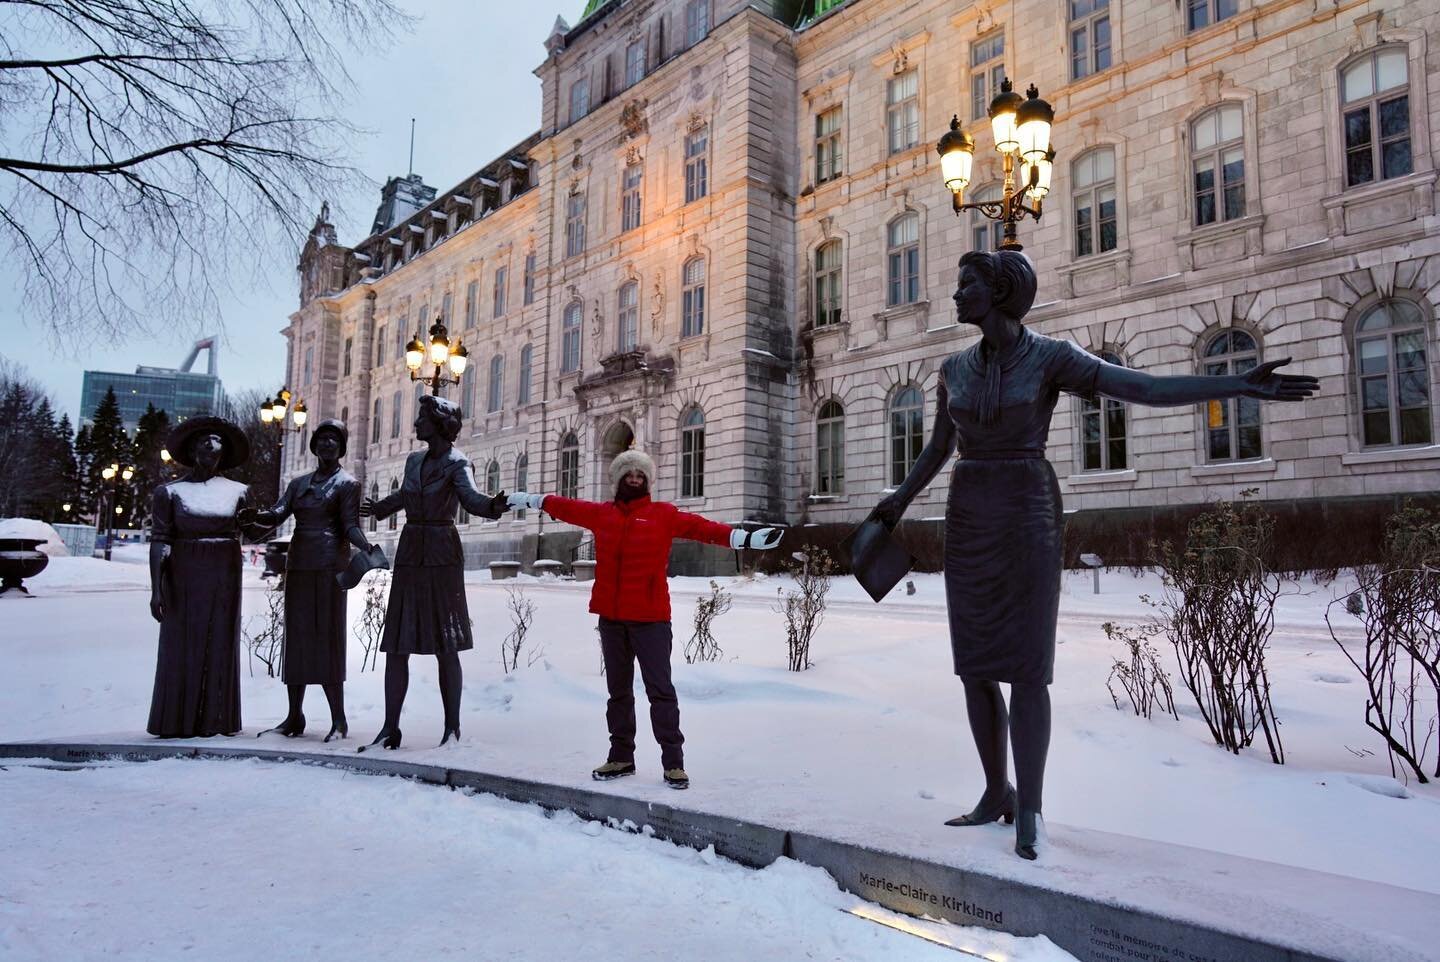 These are the #suffragette #women of #Quebec